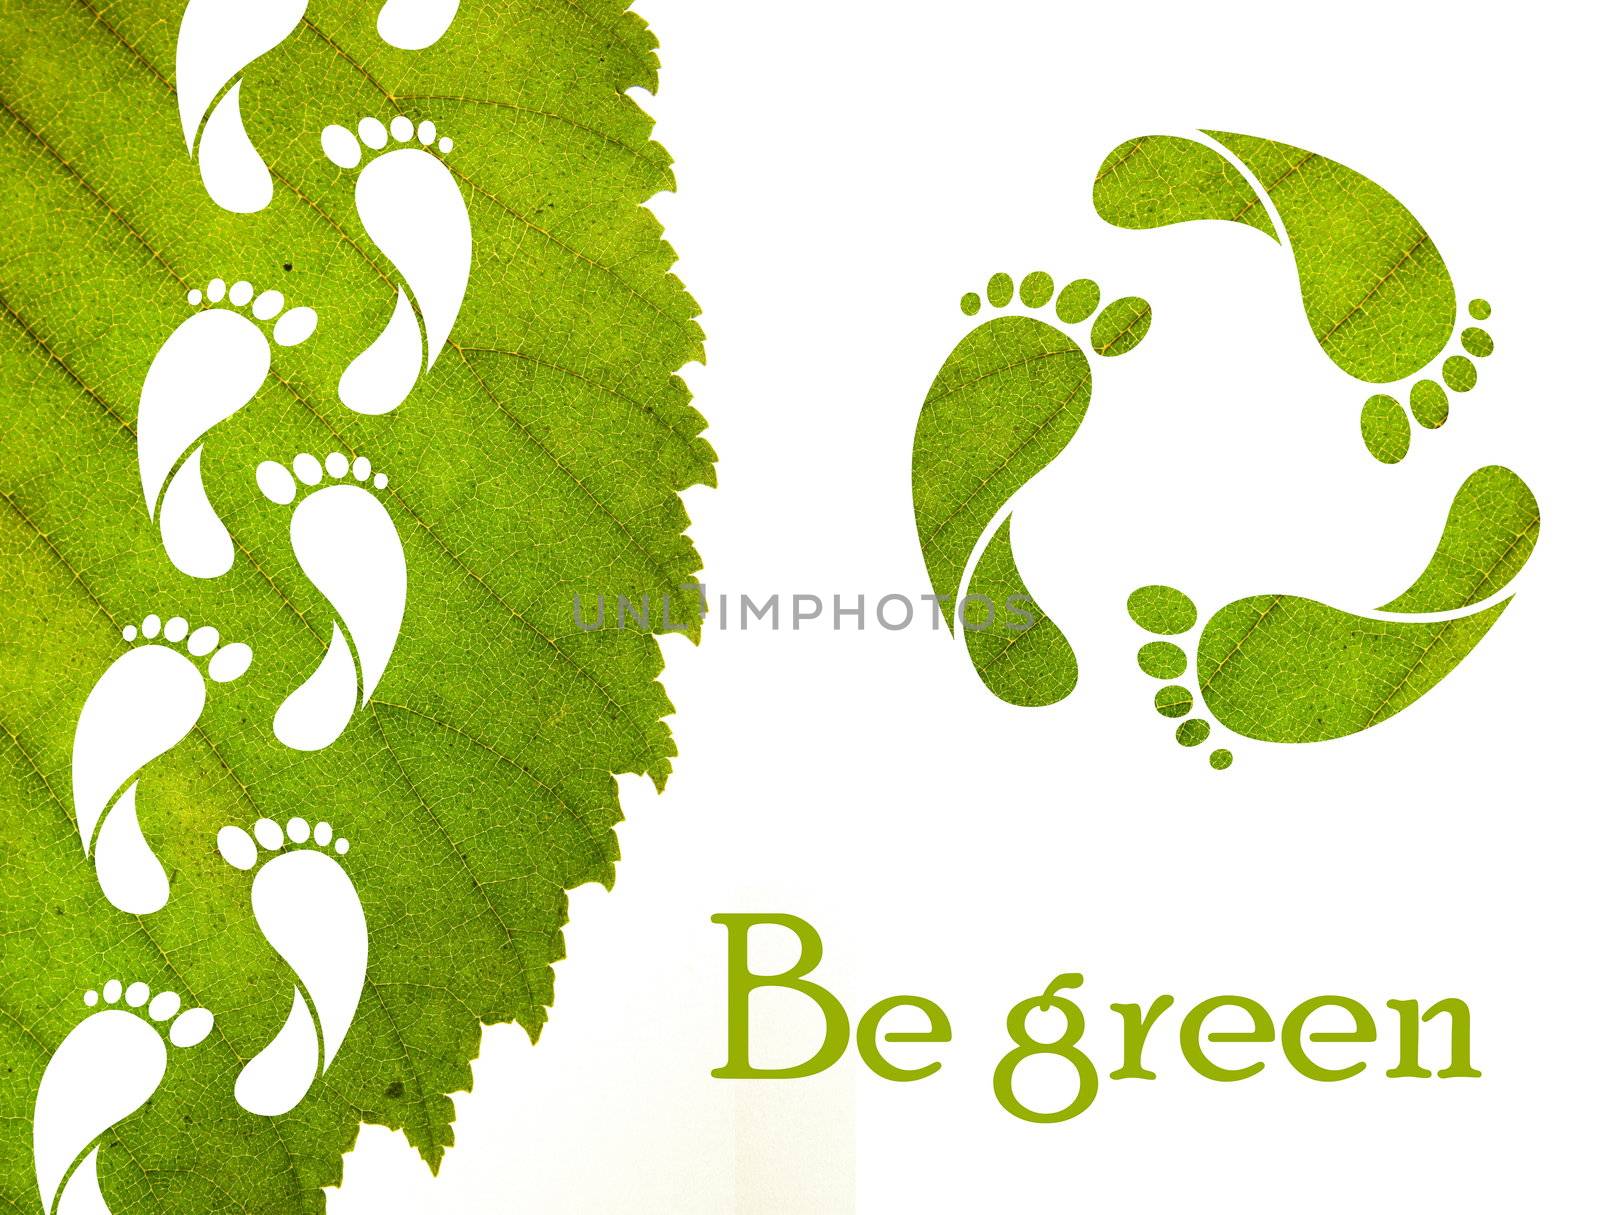 Footprint recycle sign and green leaf with foot carbon prints